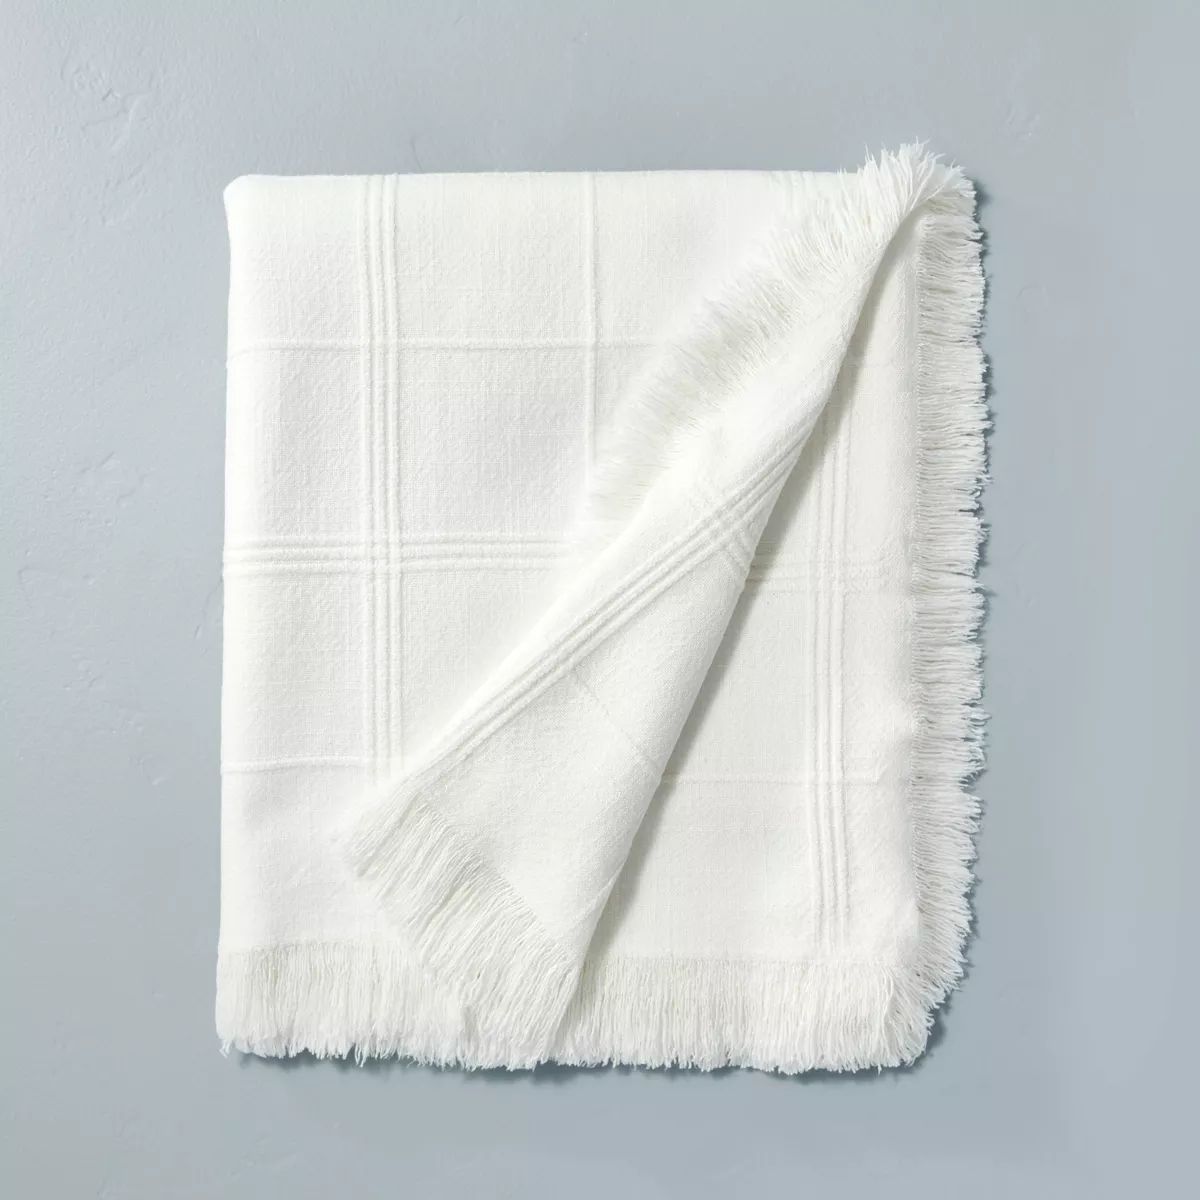 Textured Grid Lines Dobby Throw Blanket Cream - Hearth & Hand™ with Magnolia | Target